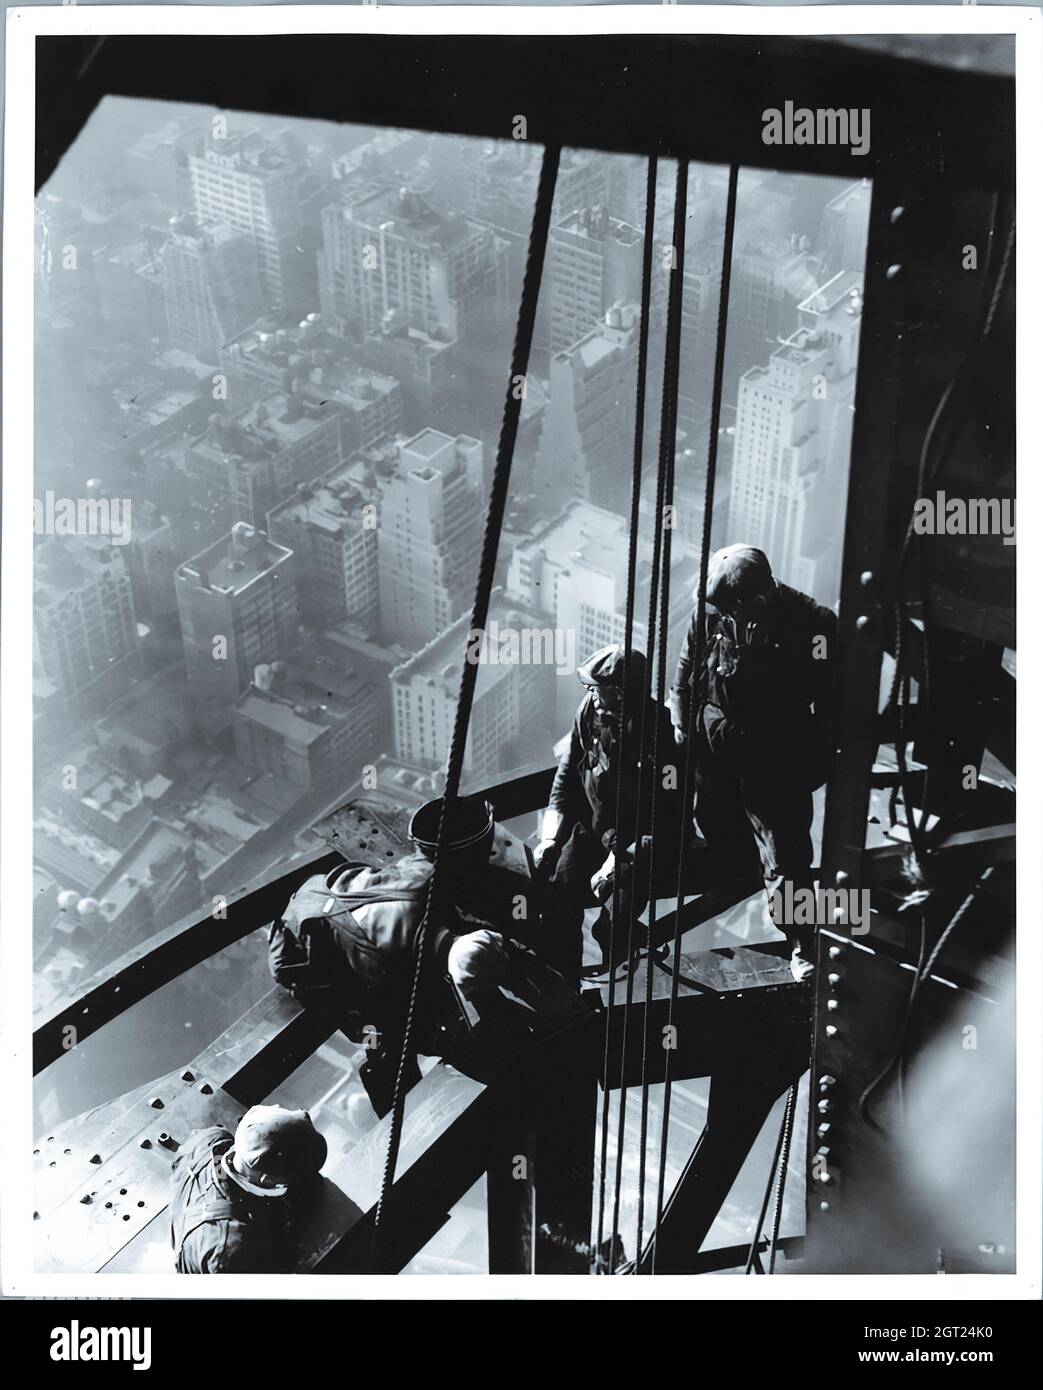 EMPIRE STATE BUILDING NY,NY 1930 - 1931. General and detailed views of the Empire State Building under construction showing workers performing various tasks including positioning, welding and riveting steel, hoisting materials and supplies, and operating and repairing machinery. There are also birds-eye views of midtown Manhattan showing other buildings under construction. Photographs by: Hine, Lewis Wickes, 1874-1940 . Stock Photo